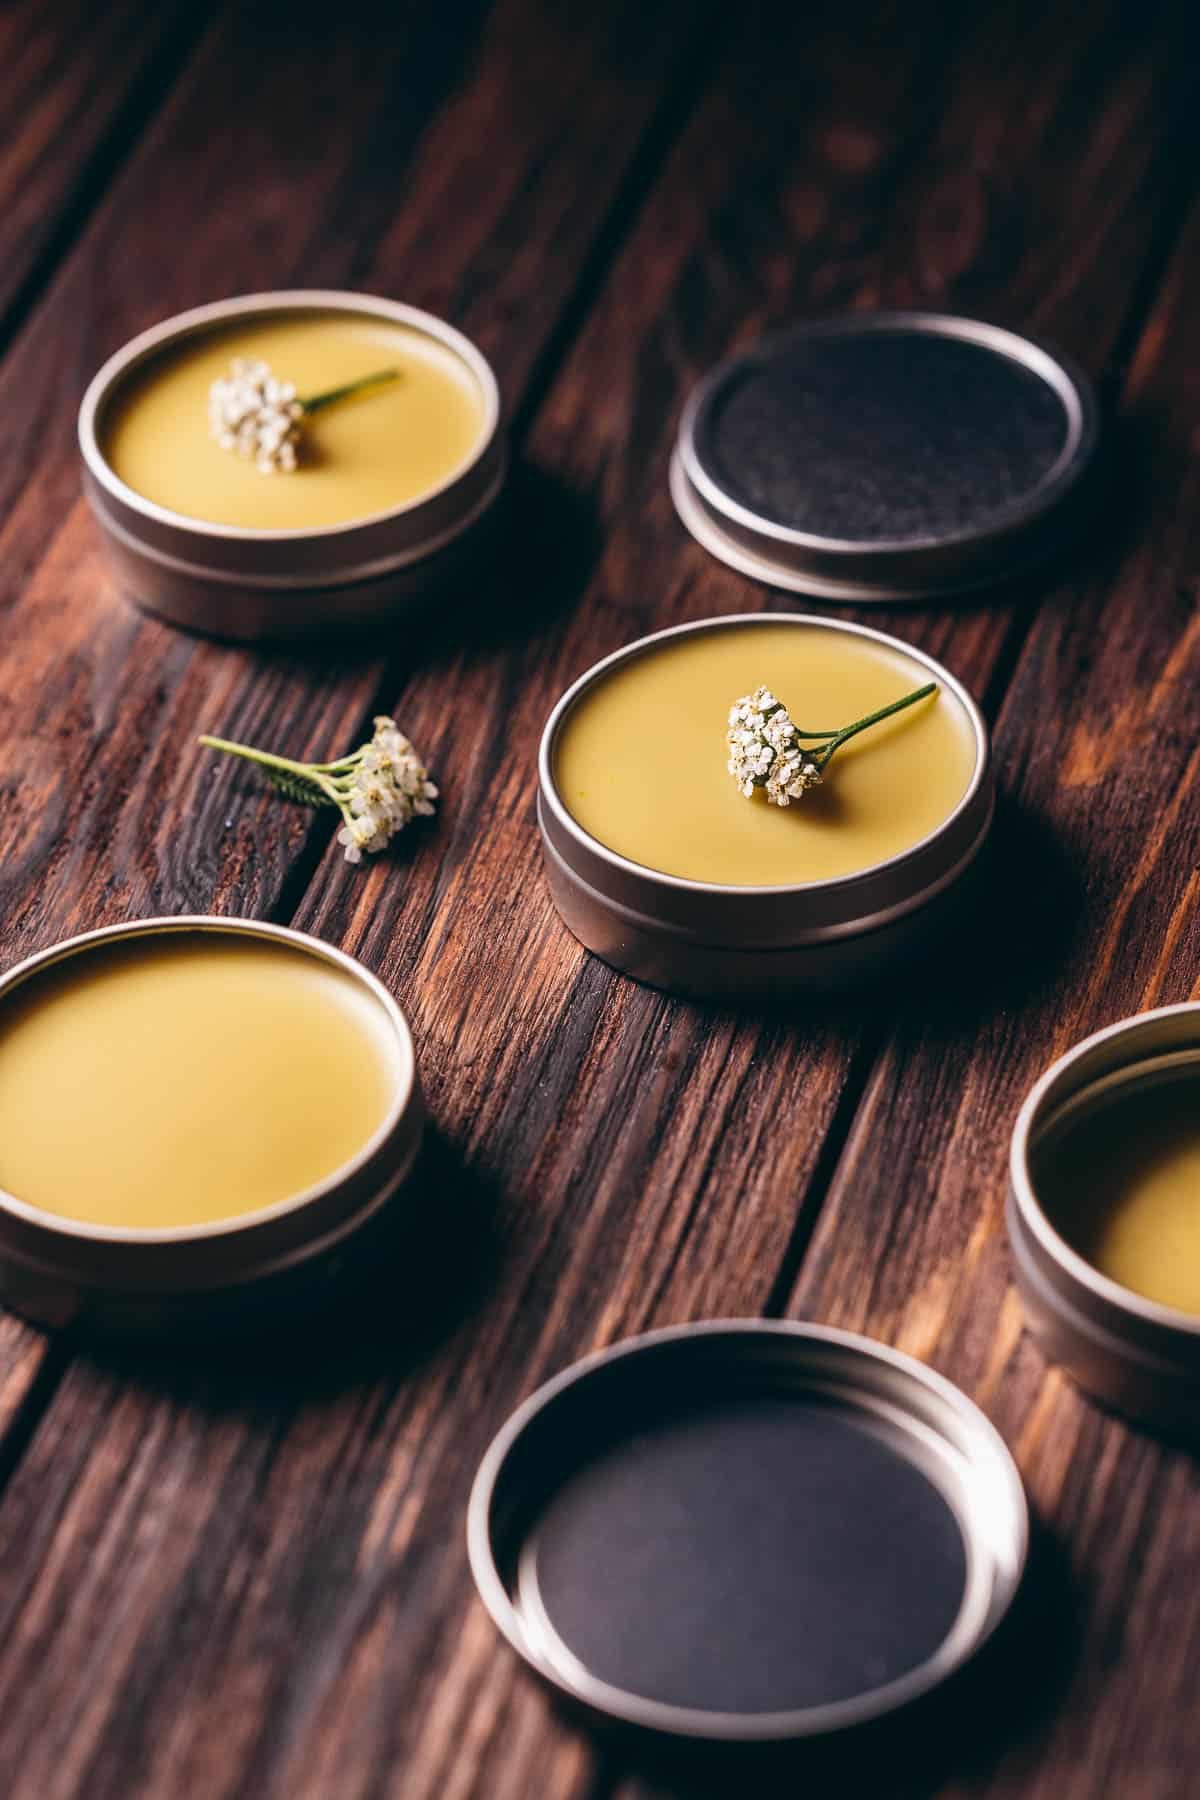 Close view of a silver salve tin fillwed with a yellow balm and topped with a small white yarrow flower.